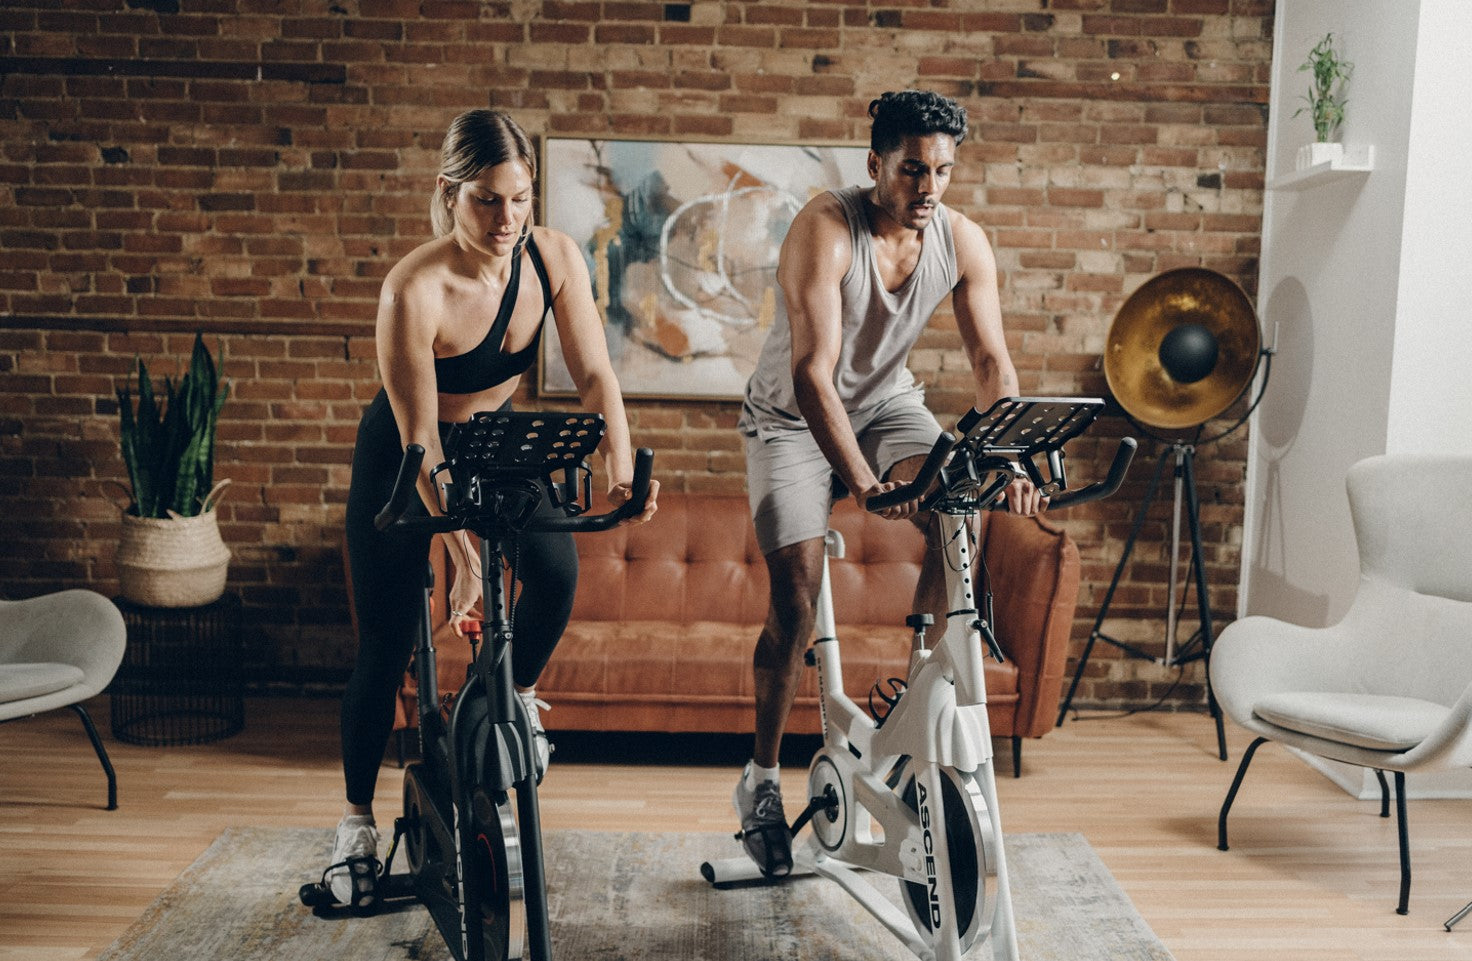 Easy pace indoor cycling rides